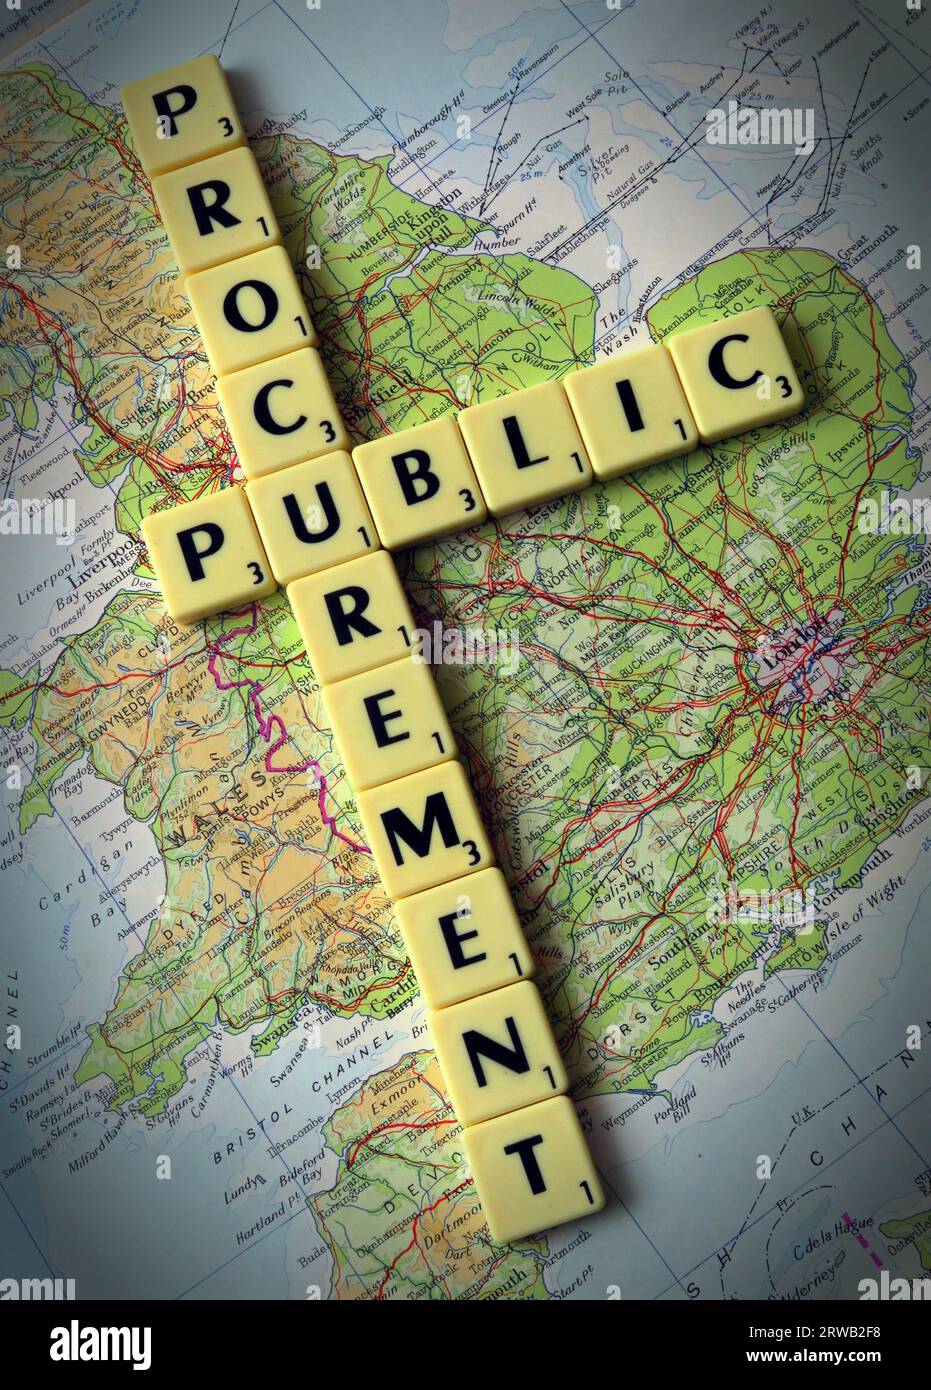 Public procurement in Scrabble letters on a map of Great Britain, Stock Photo